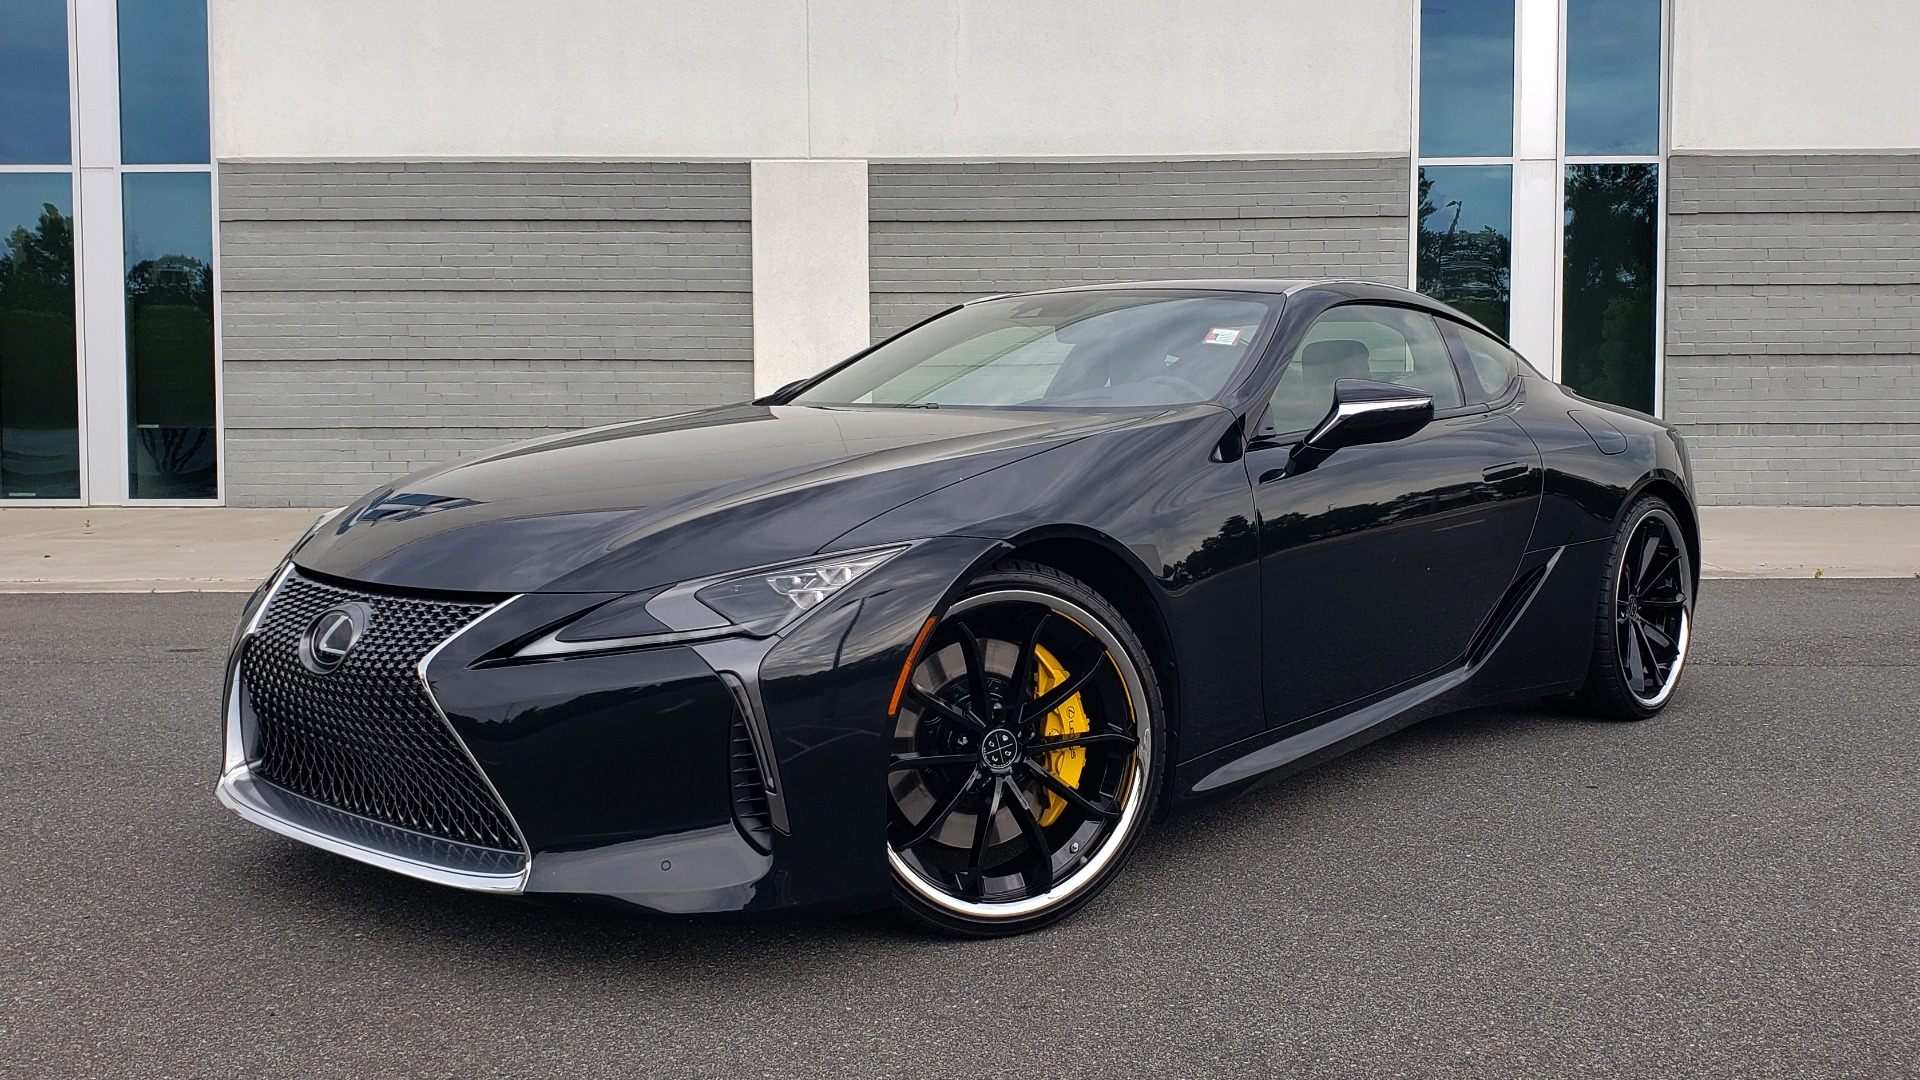 Used 2018 Lexus LC 500 COUPE / 5.0L V8 (471HP) / 10-SPD AUTO / HUD / SUNROOF / REARVIEW for sale Sold at Formula Imports in Charlotte NC 28227 1